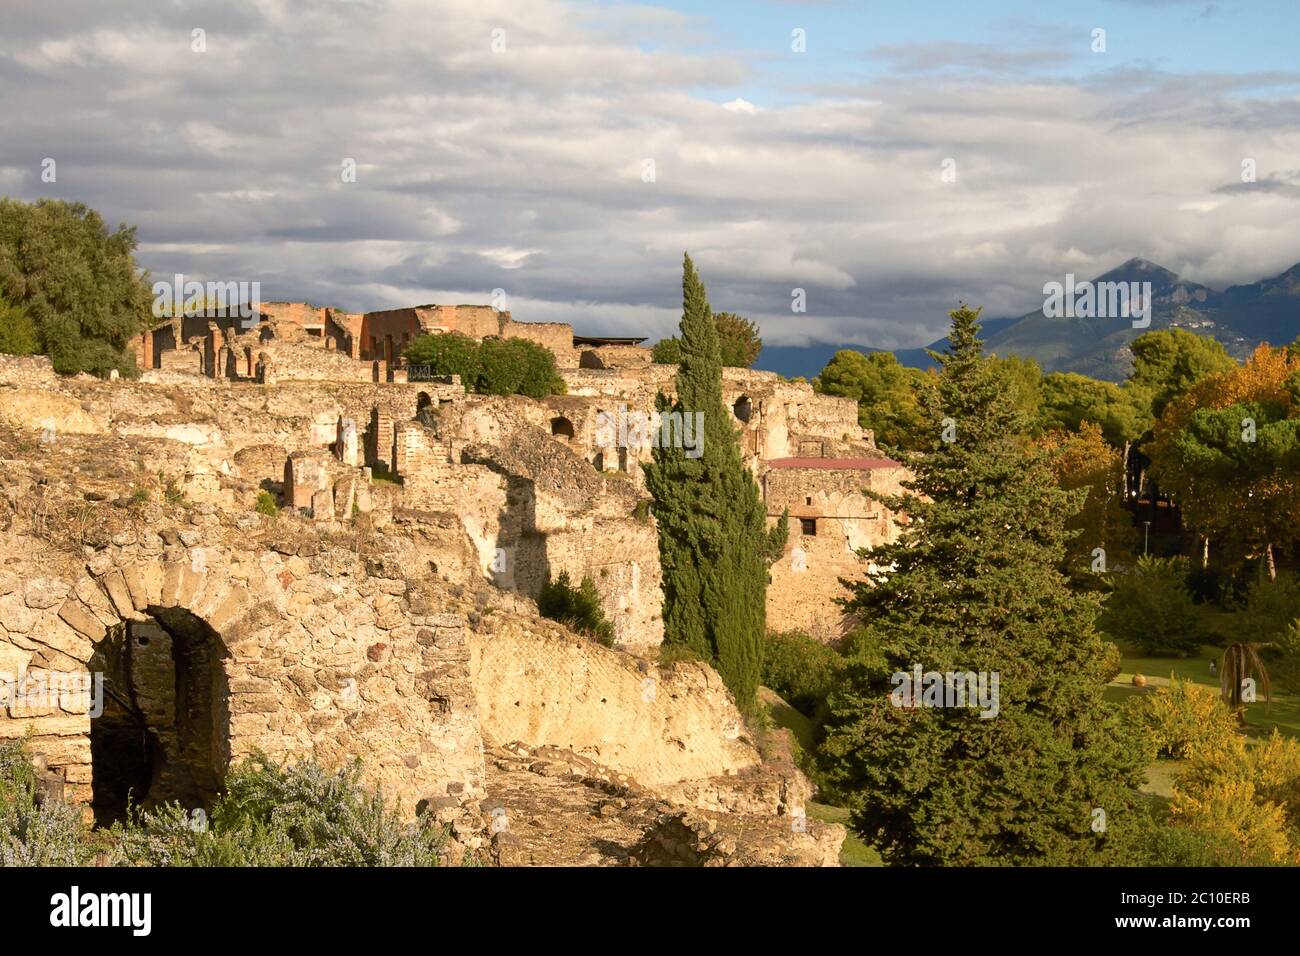 Ruins and Remains of the city of Pompeii Italy Stock Photo